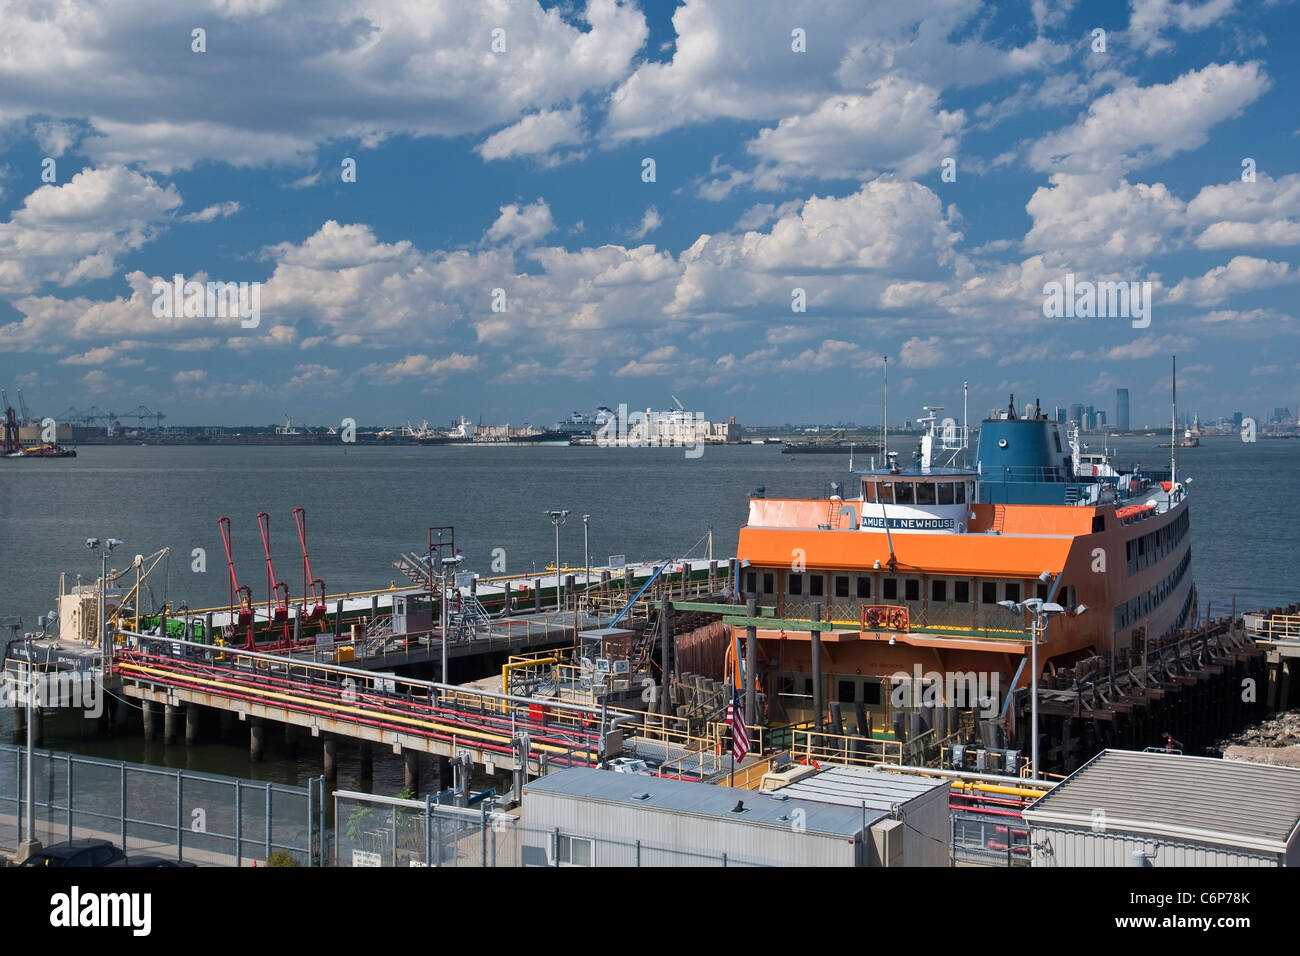 The MV Samuel I. Newhouse Staten Island ferry is seen docked at the Staten Island St. George Ferry Terminal Stock Photo